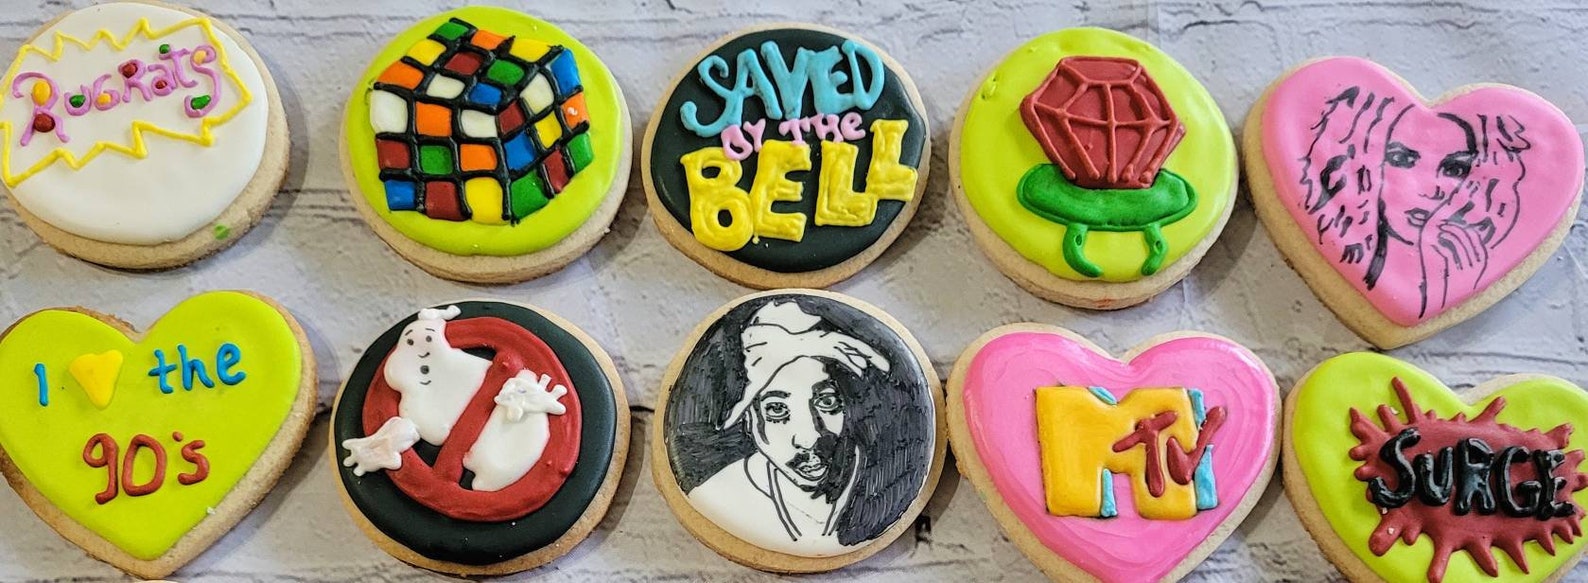 I love the 90s themed cookies 90s party vegan dairy free | Etsy